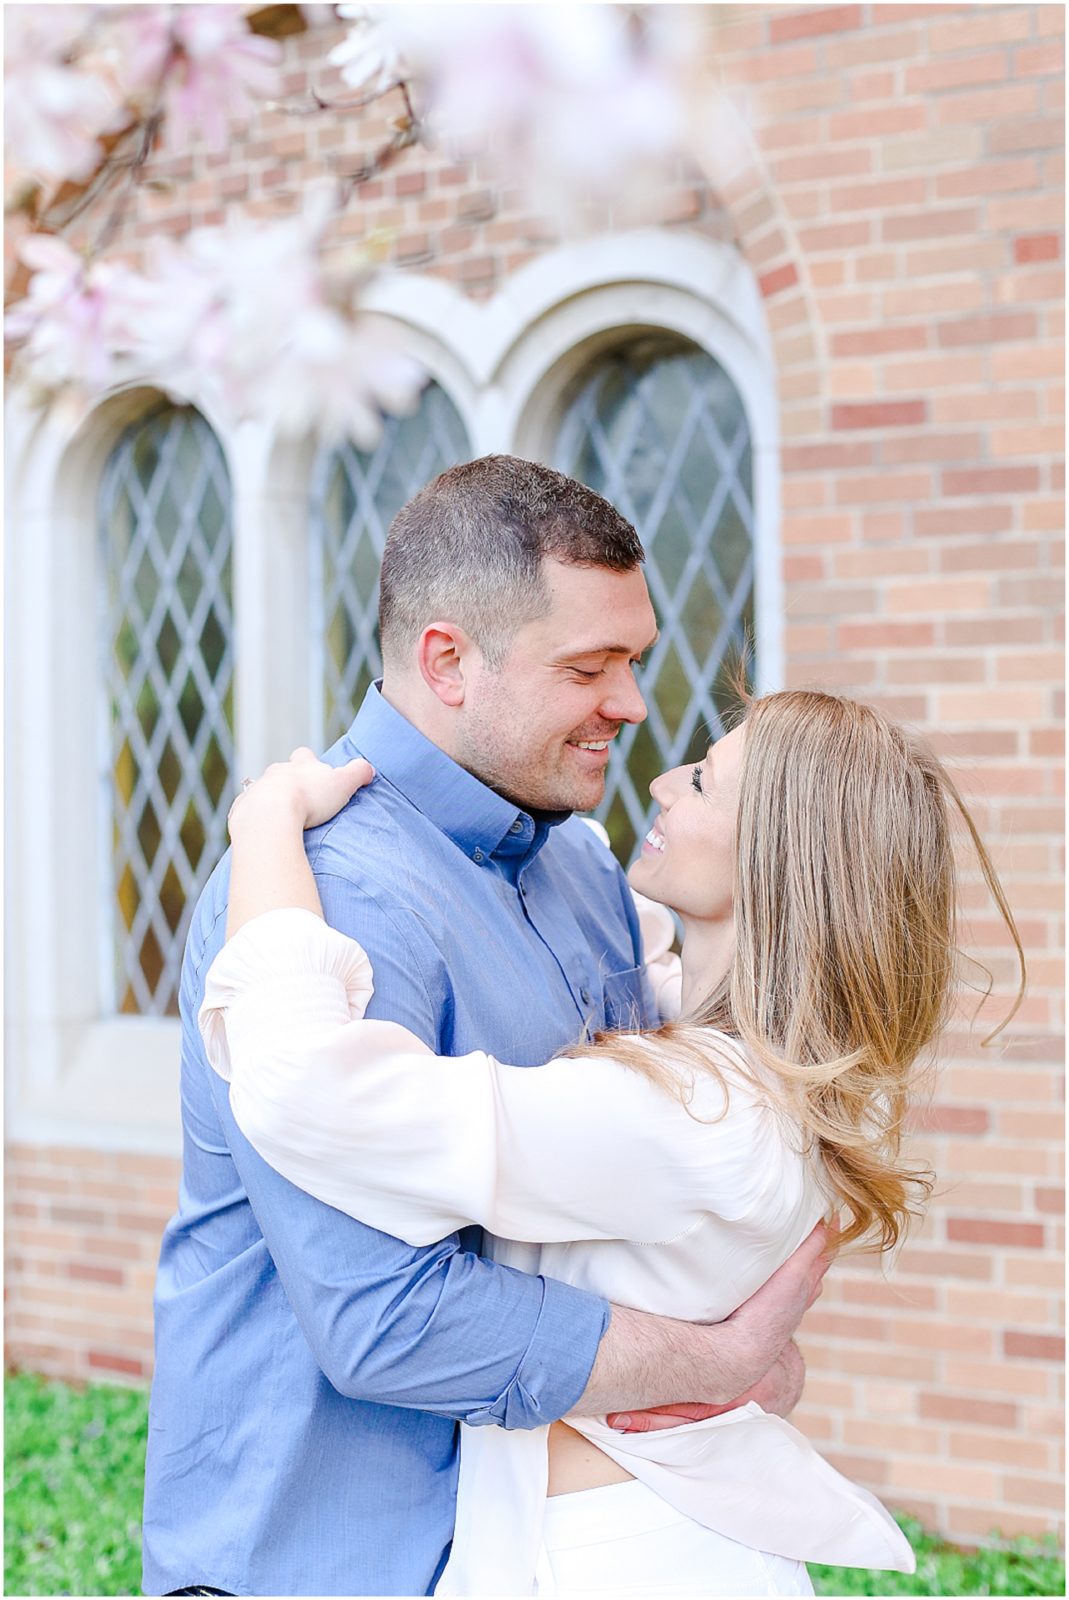 Engagement Photos and Wedding Photos at the Country Club Plaza in Kansas City - Wedding Photographers - Cute engagement photo idaes